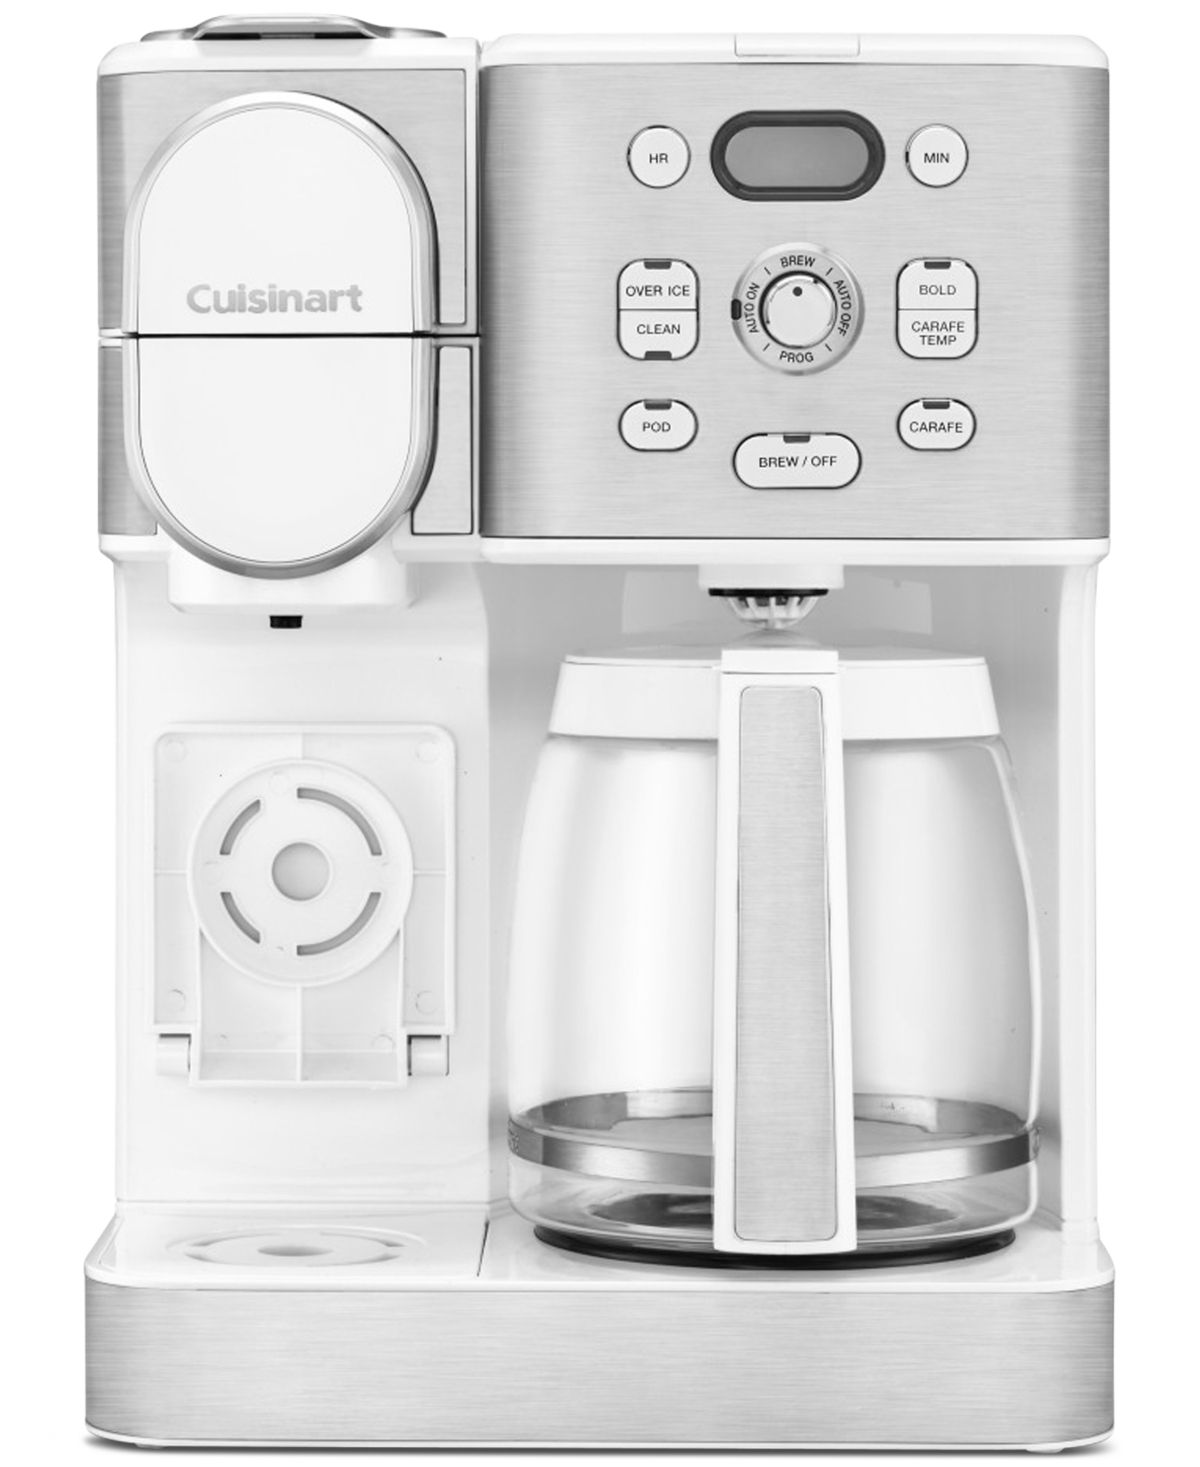 Cuisinart Coffee Center 2-in-1 12-cup Drip Coffeemaker In White